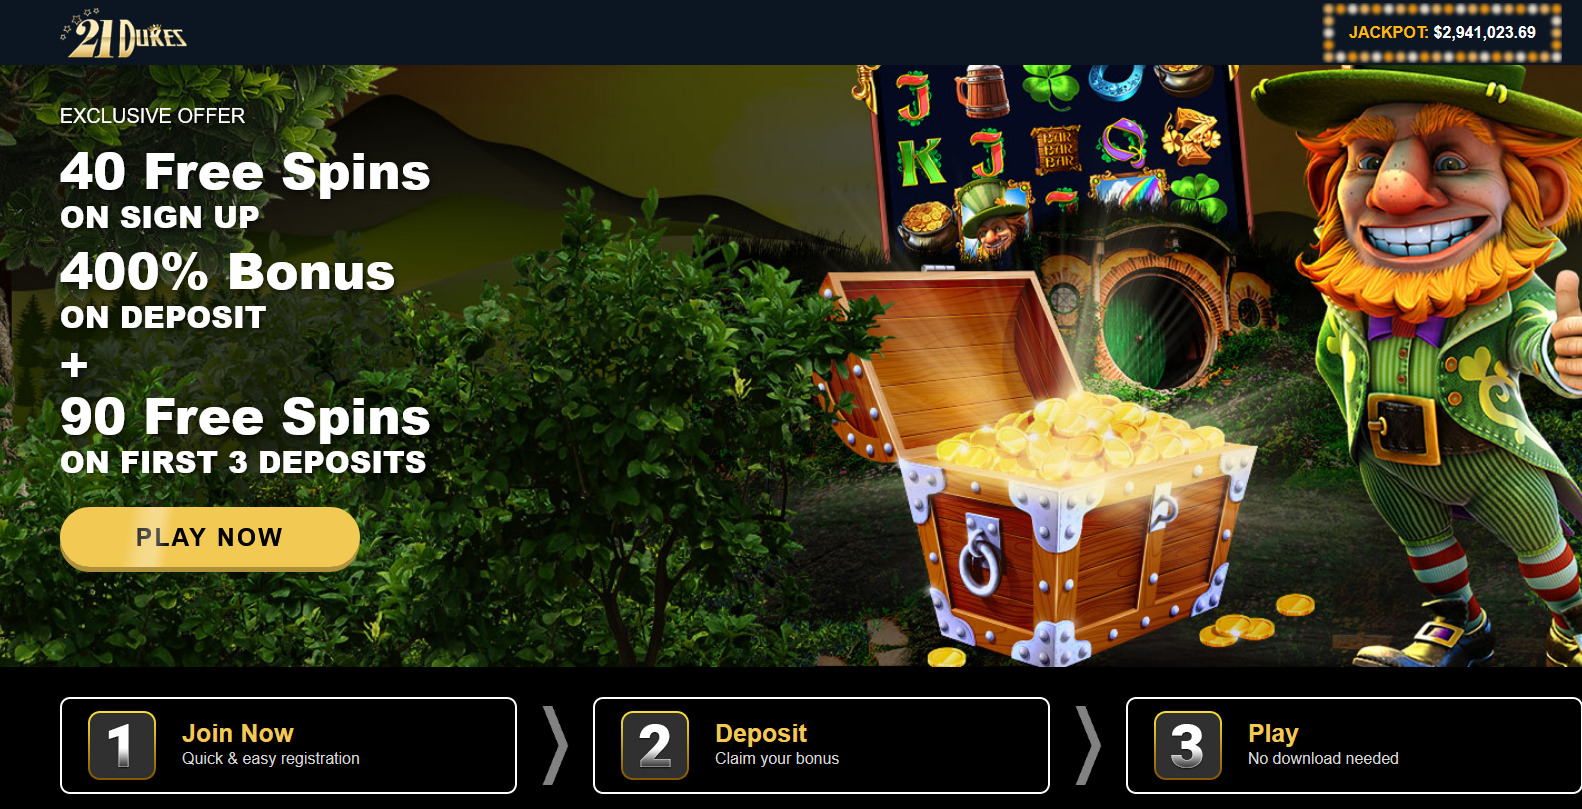 EXCLUSIVE
                                                        OFFER 40 Free
                                                        Spins ON SIGN UP
                                                        400% Bonus ON
                                                        DEPOSIT + 90
                                                        Free Spins ON
                                                        FIRST 3
                                                        DEPOSITS